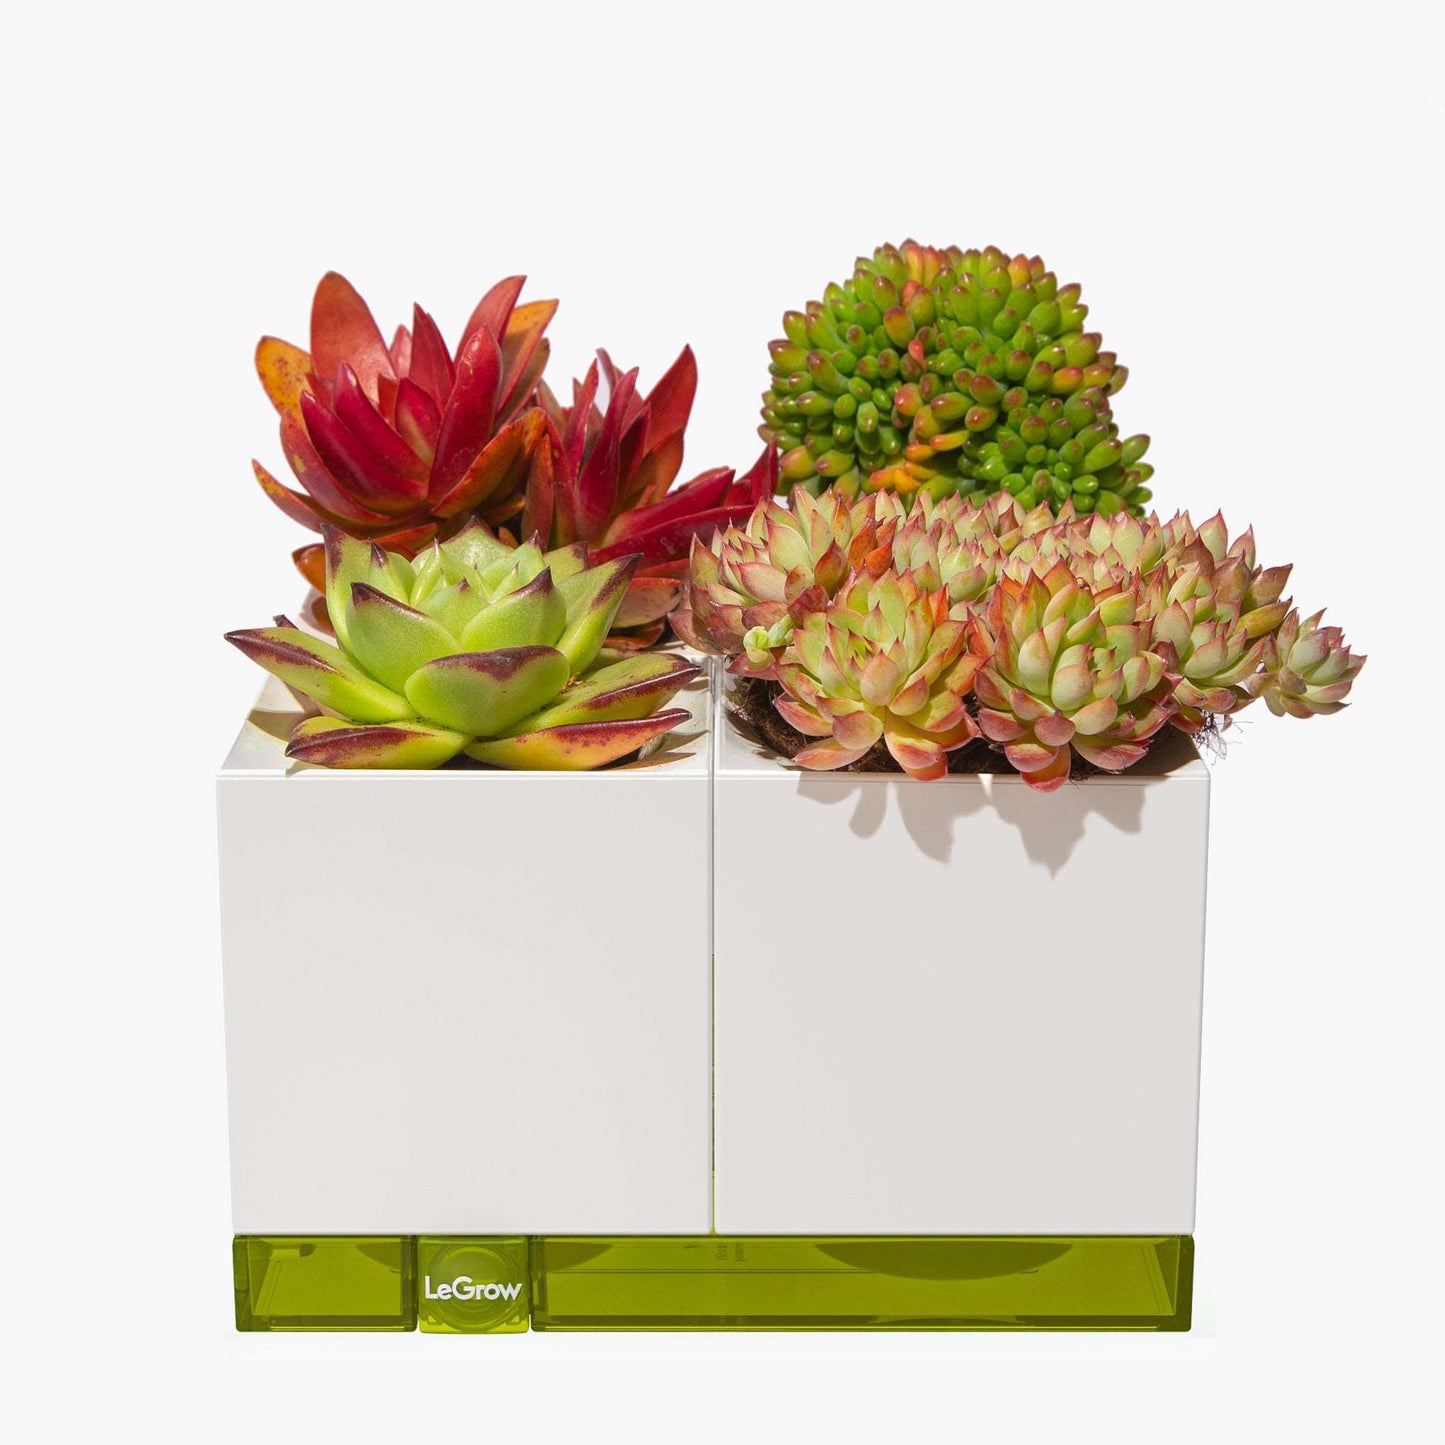 LeGrow Standard Planter with Self-watering System 7 Days Watering Free